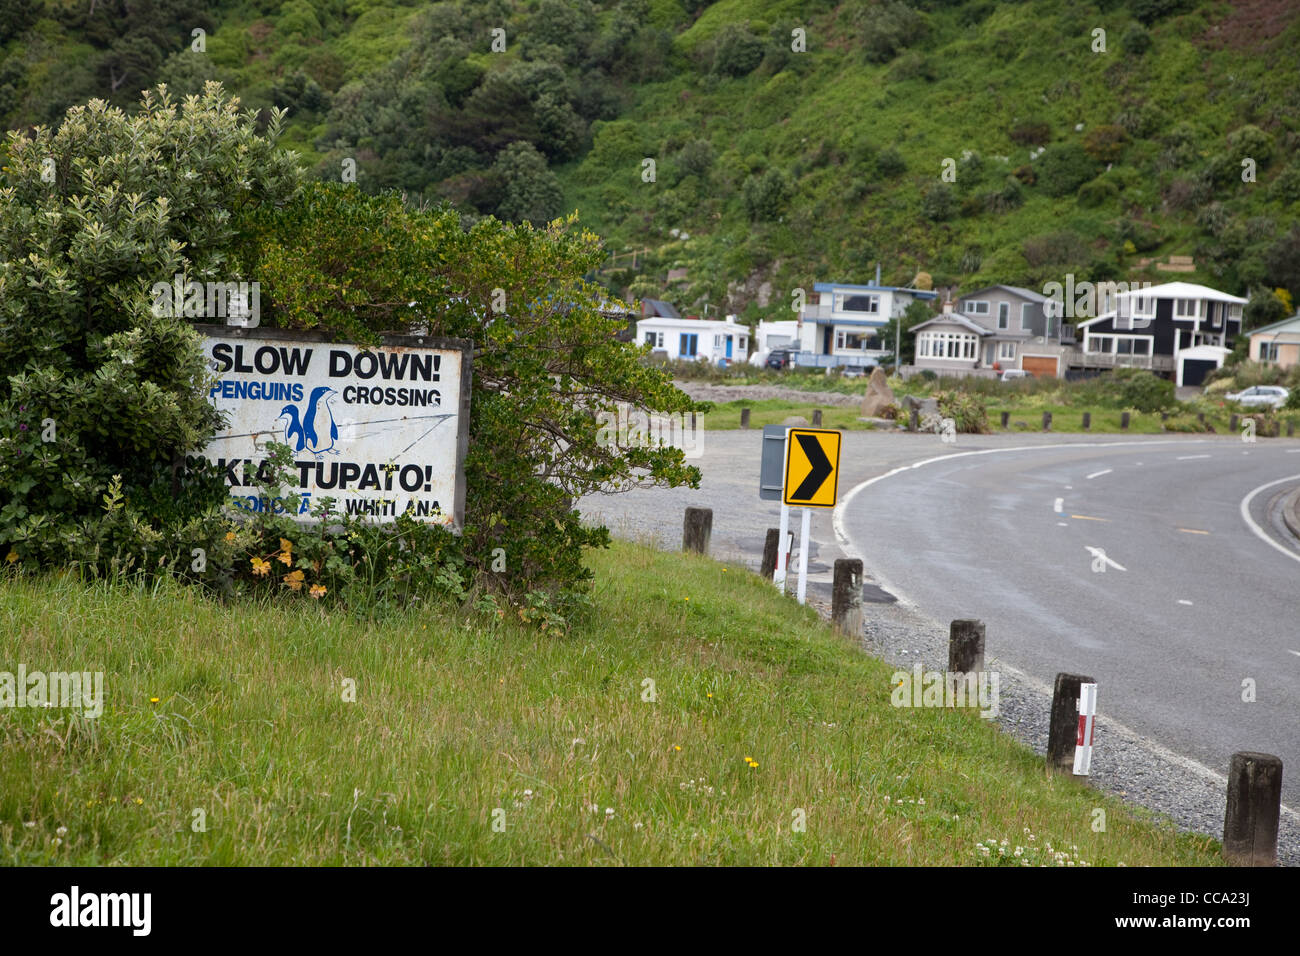 Wellington, New Zealand. 'Slow down for Penguins' Sign, Suburban Residential Area. Stock Photo